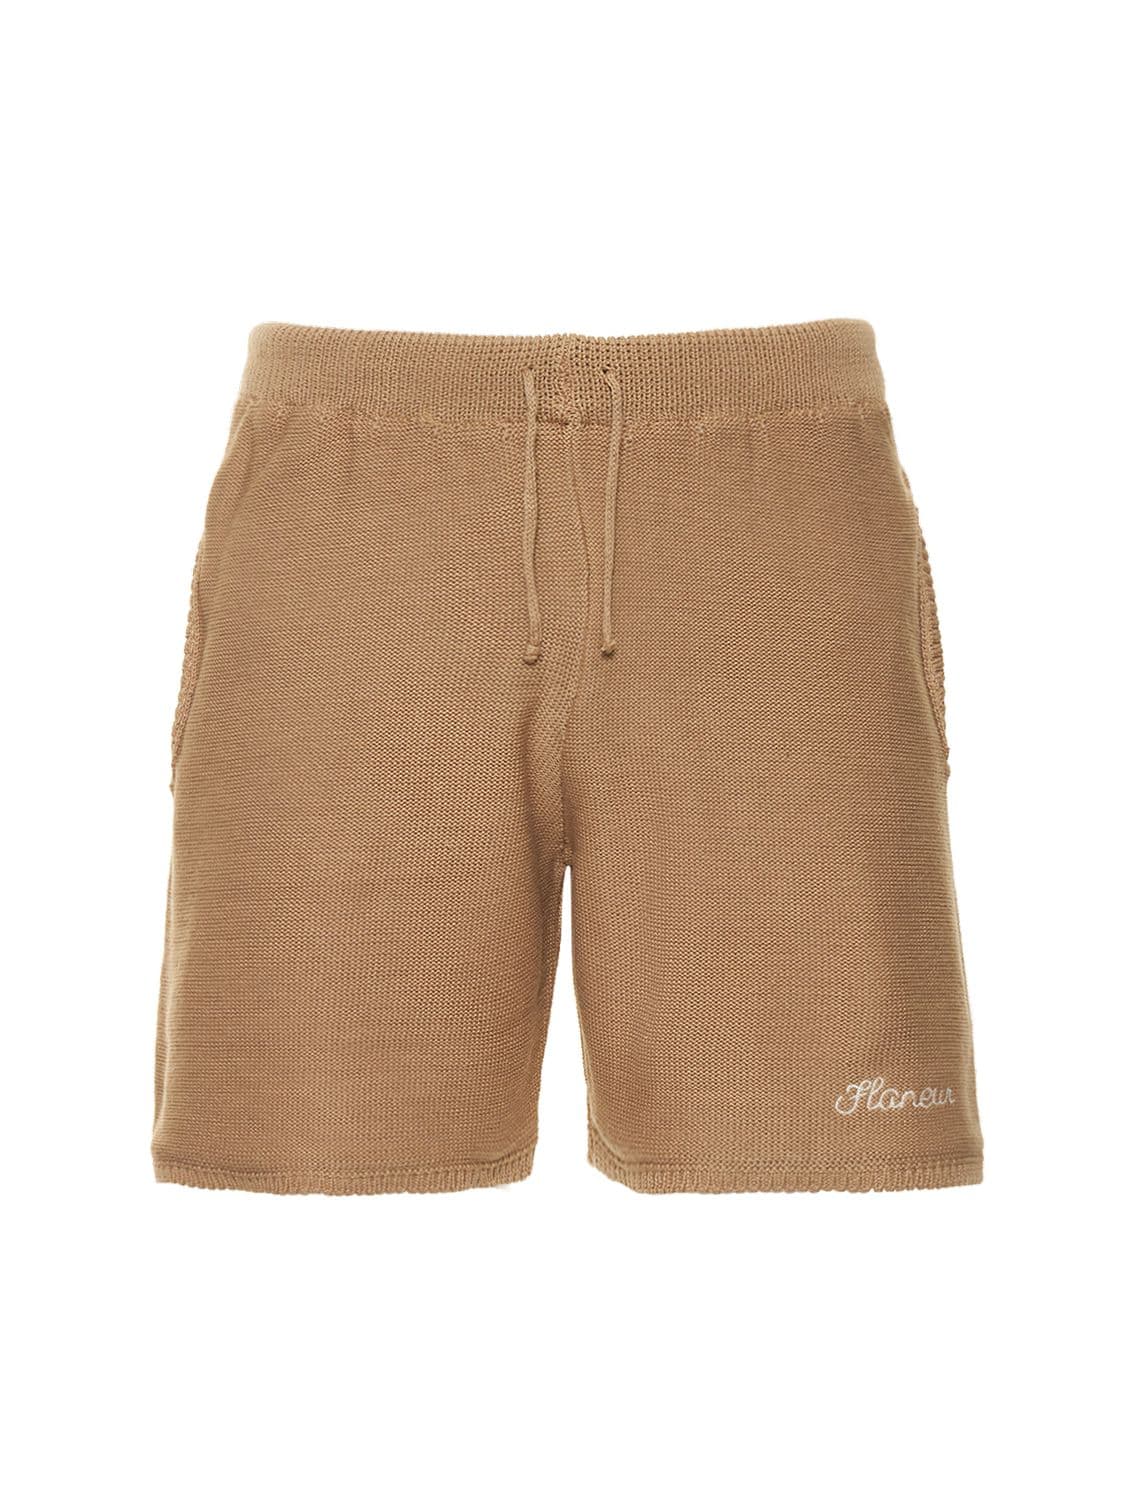 Flaneur Homme Cotton Blend Knitted Shorts In Brown